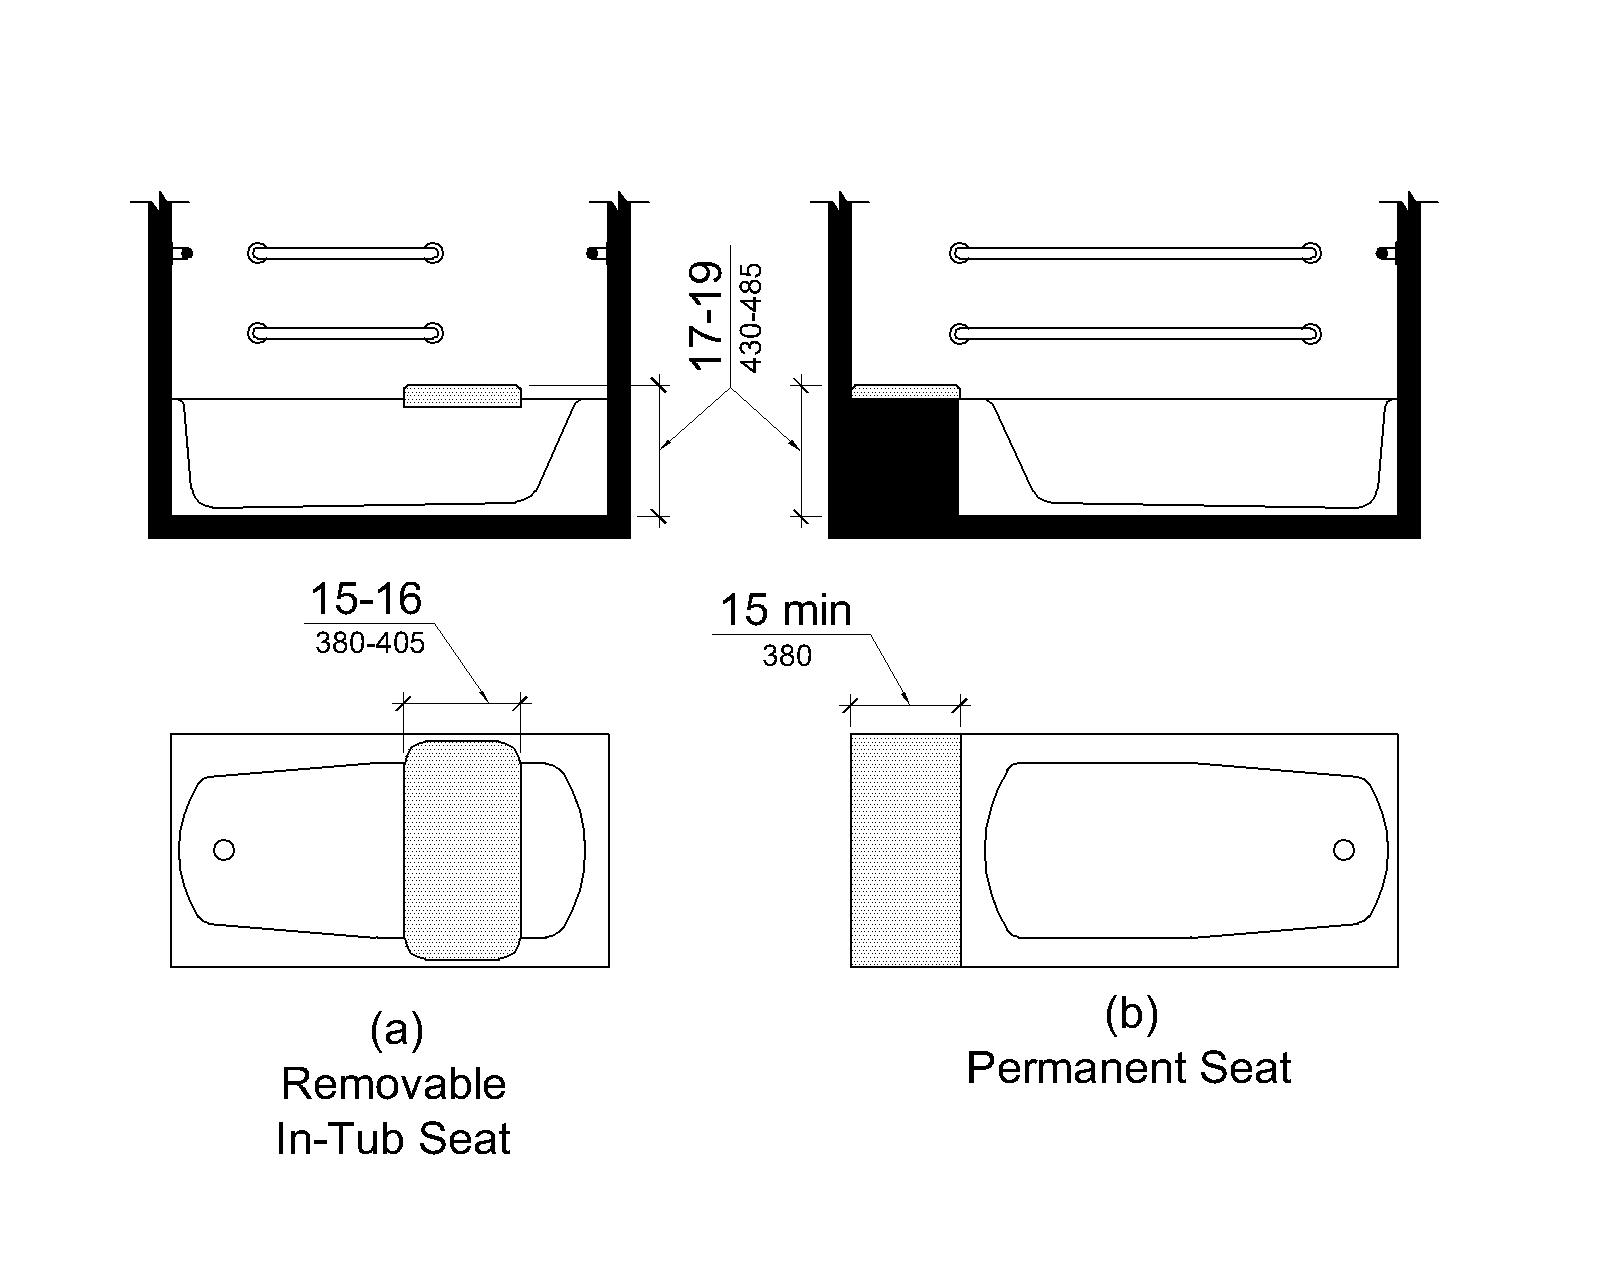 Figure (a) shows a removable in-tub seat in elevation and plan views that is 15 to 16 inches (380 to 405 mm) deep and 17 to 19 inches (430 to 485 mm) above the deck surface measured to the top of the seat. Figure (b) shows permanent tub seat in elevation and plan views that is 15 inches (380 mm) minimum deep and 17 to 19 inches (430 to 485 mm) above the deck surface measured to the top of the seat.